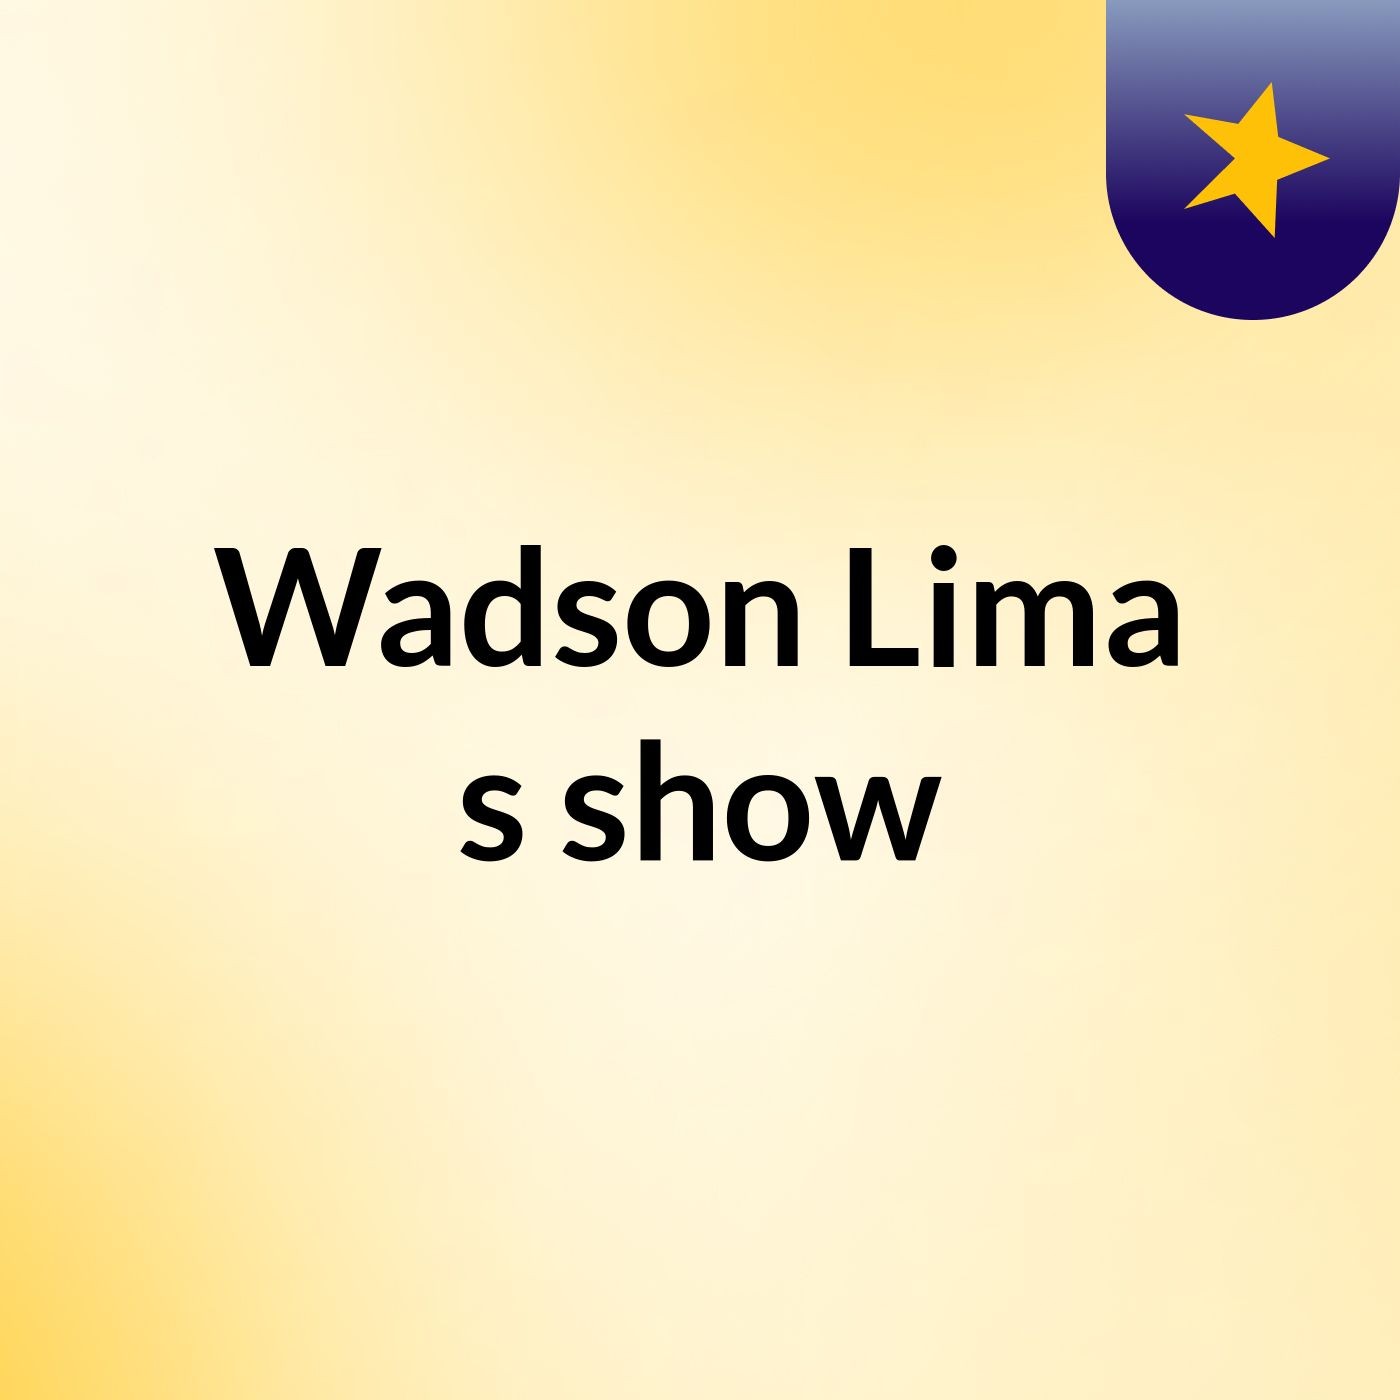 Wadson Lima's show